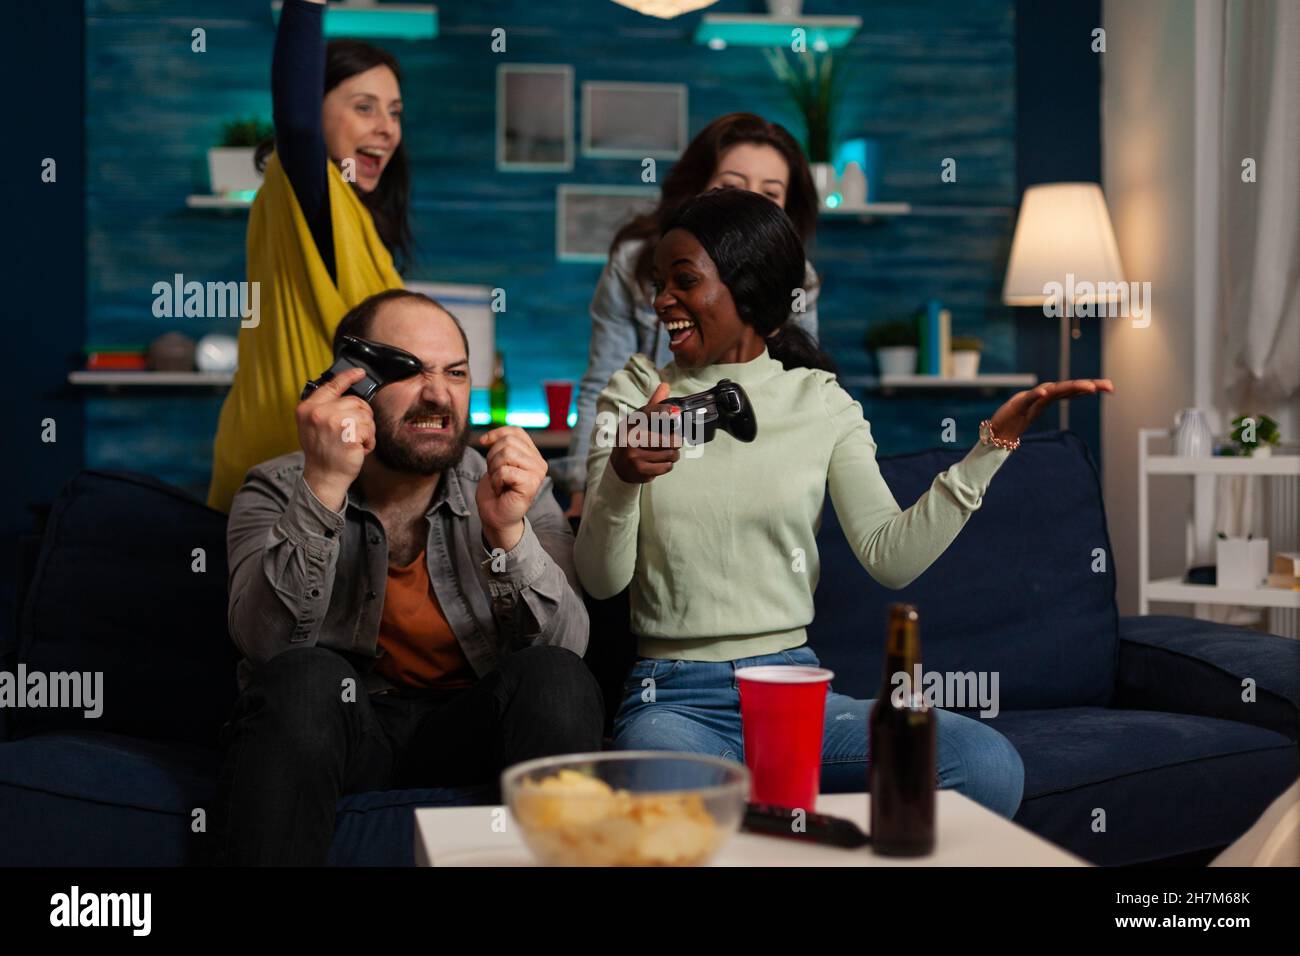 Upset nervous multiethnic friends holding controller playing video games losing online competition sitting on couch in front of tv. Group of people enjoying spending time together. Hanging out concept Stock Photo